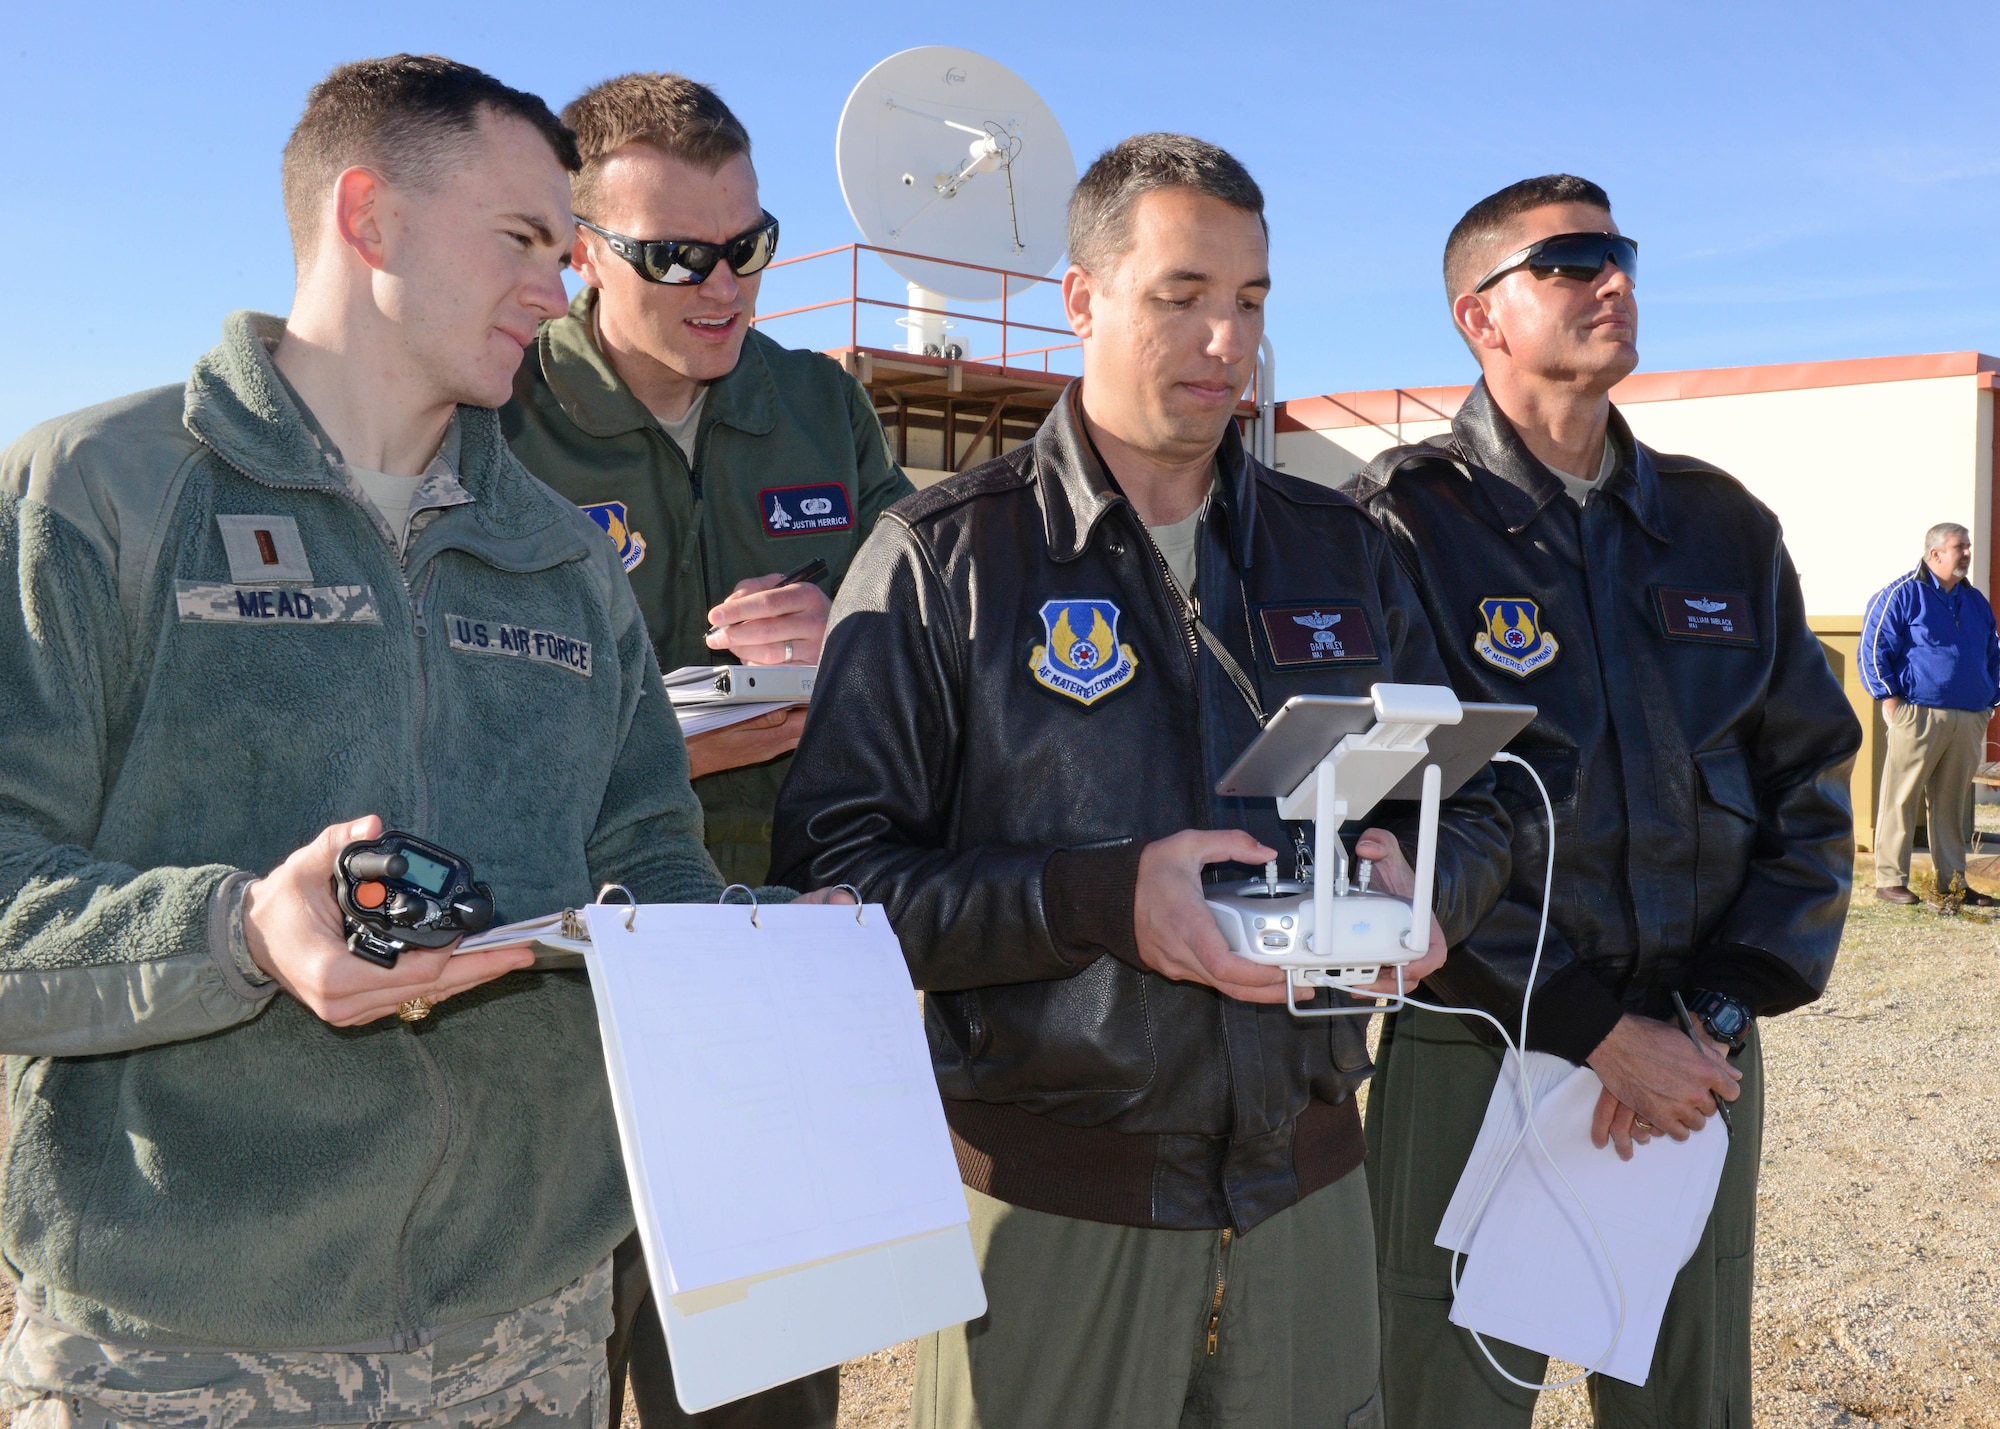 From left to right: 2nd Lt. William Mead, 412th Operations Group; Capt. Justin Merrick, Emerging Technologies Combined Test Force, lead engineer; Maj. Danny Riley, ET CTF director; and Maj. William Niblack, ET CTF operations officer, participated in the first test event for the ET CTF Feb. 13. (U.S. Air Force photo by Kenji Thuloweit)